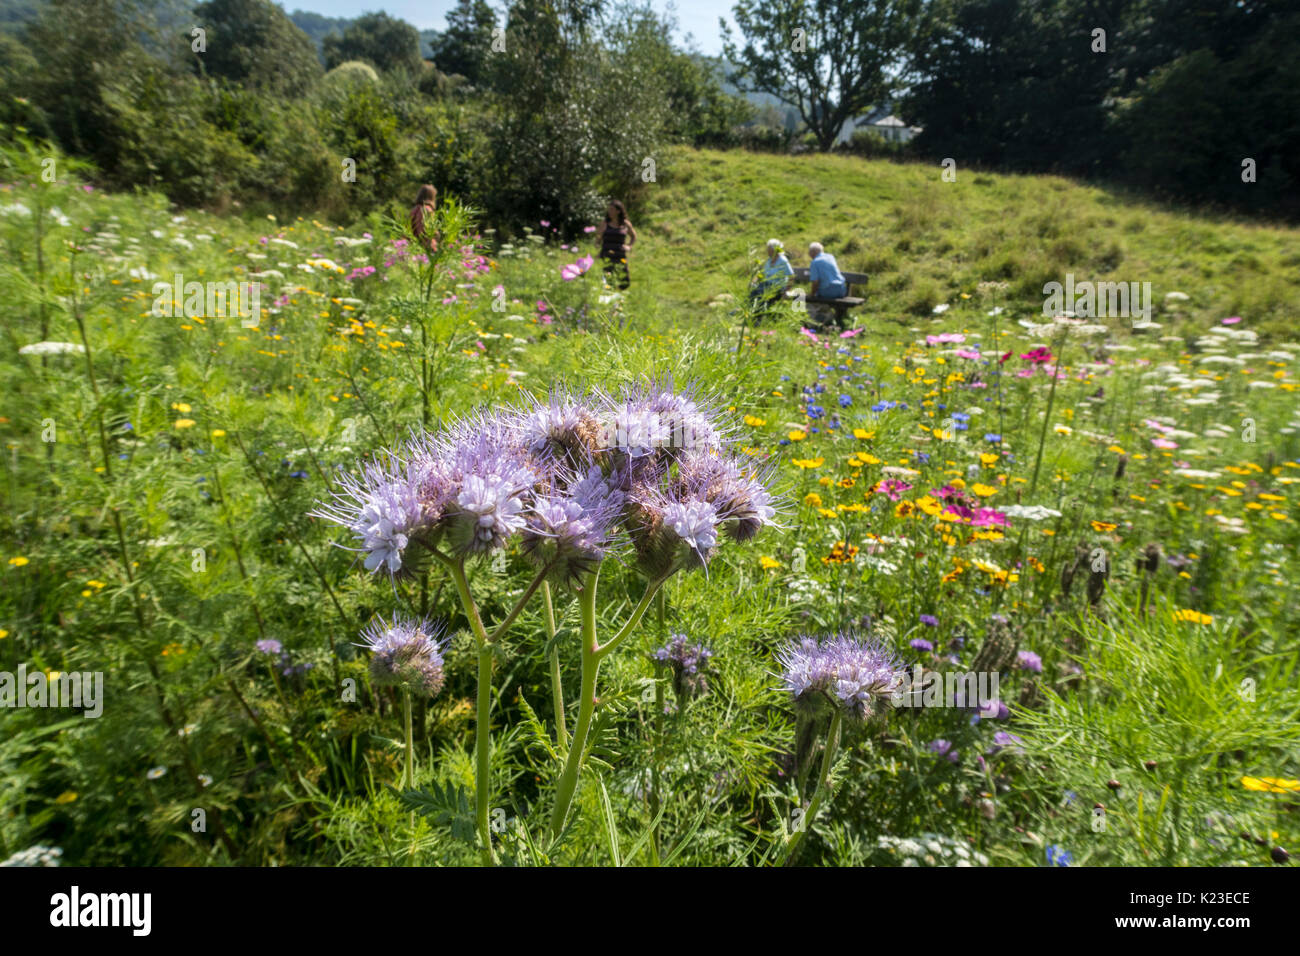 Sidmouth, Devon, 28th Aug 17. Glorious bank holiday weather draws crowds of visitors to the wild flower meadows in Sidmouth, alongside the famous 'Byes' riverside walk.  Credit: Photo Central/Alamy Live News Stock Photo